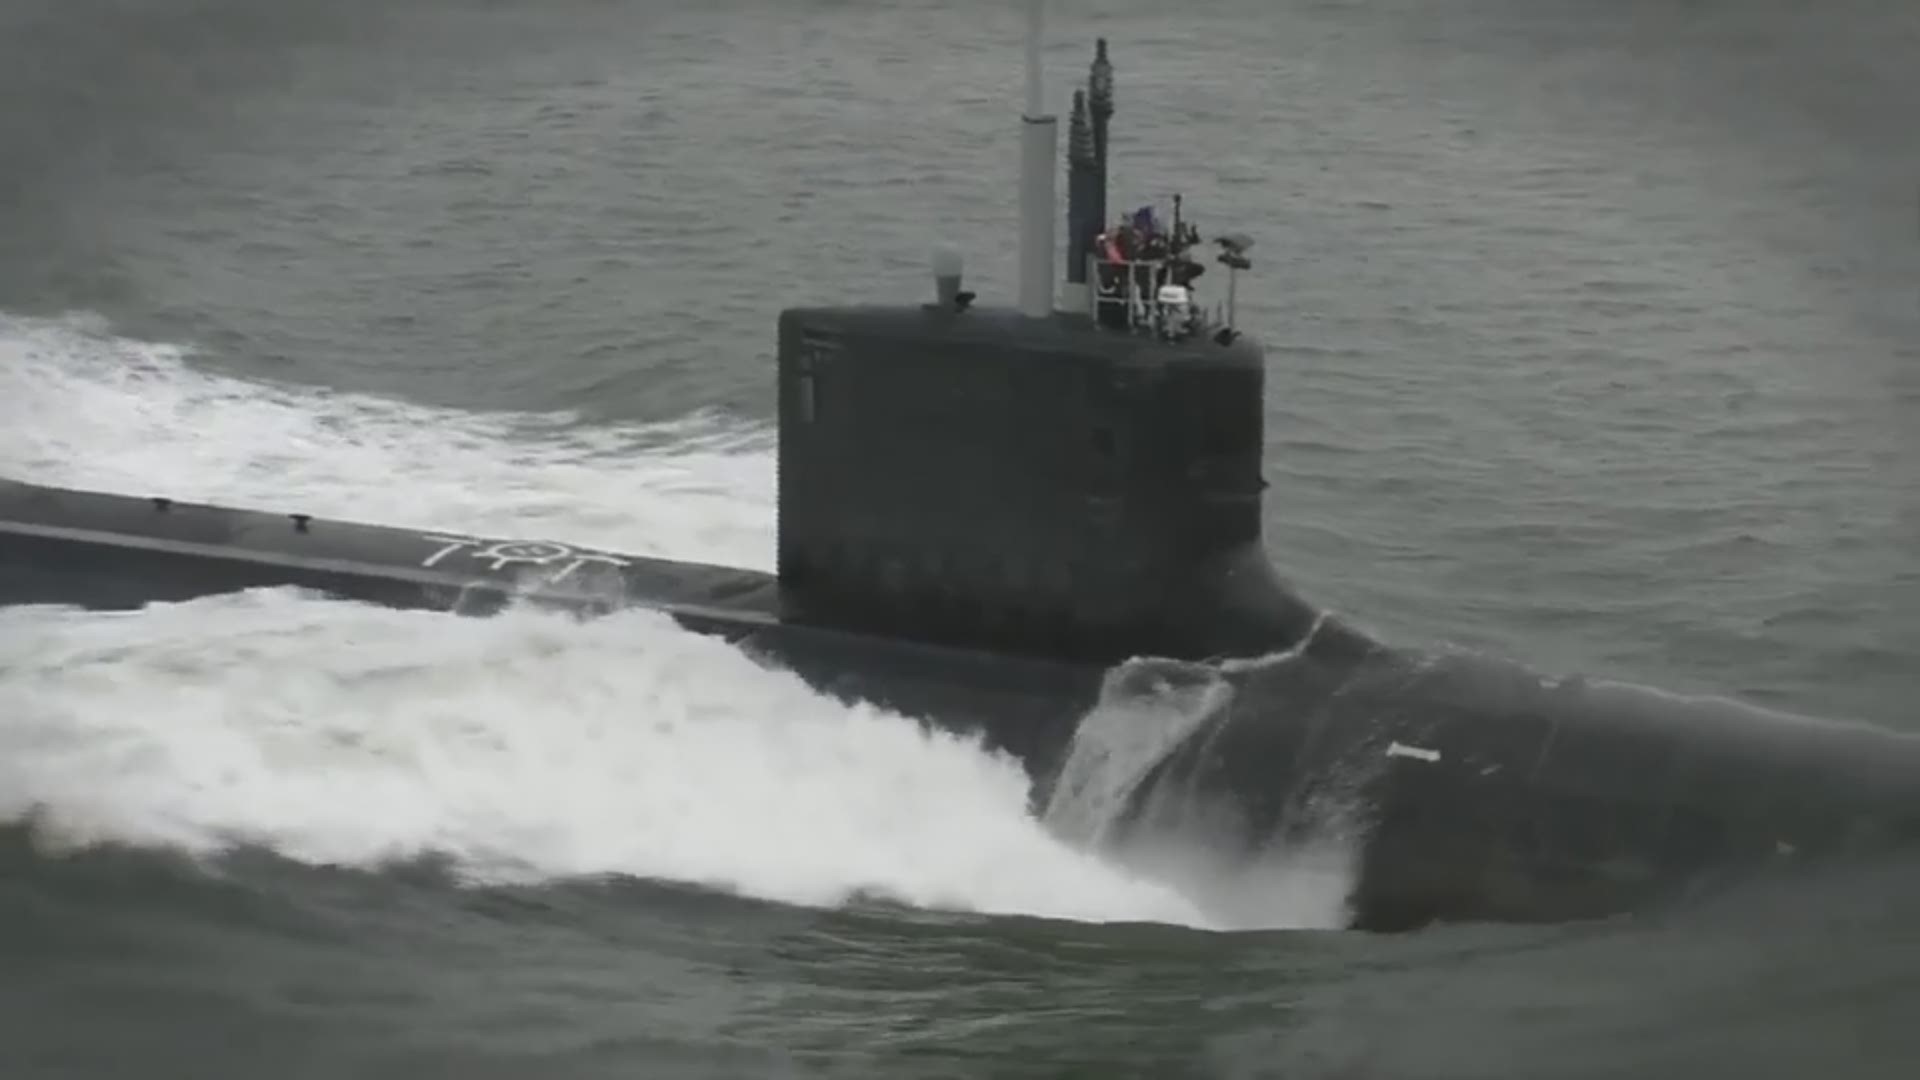 Known as alpha trials, the shipbuilder tested Indiana's systems and components, which included submerging the sub for the first time and completing high-speed maneuvers. Video courtesy Huntington Ingalls Industries